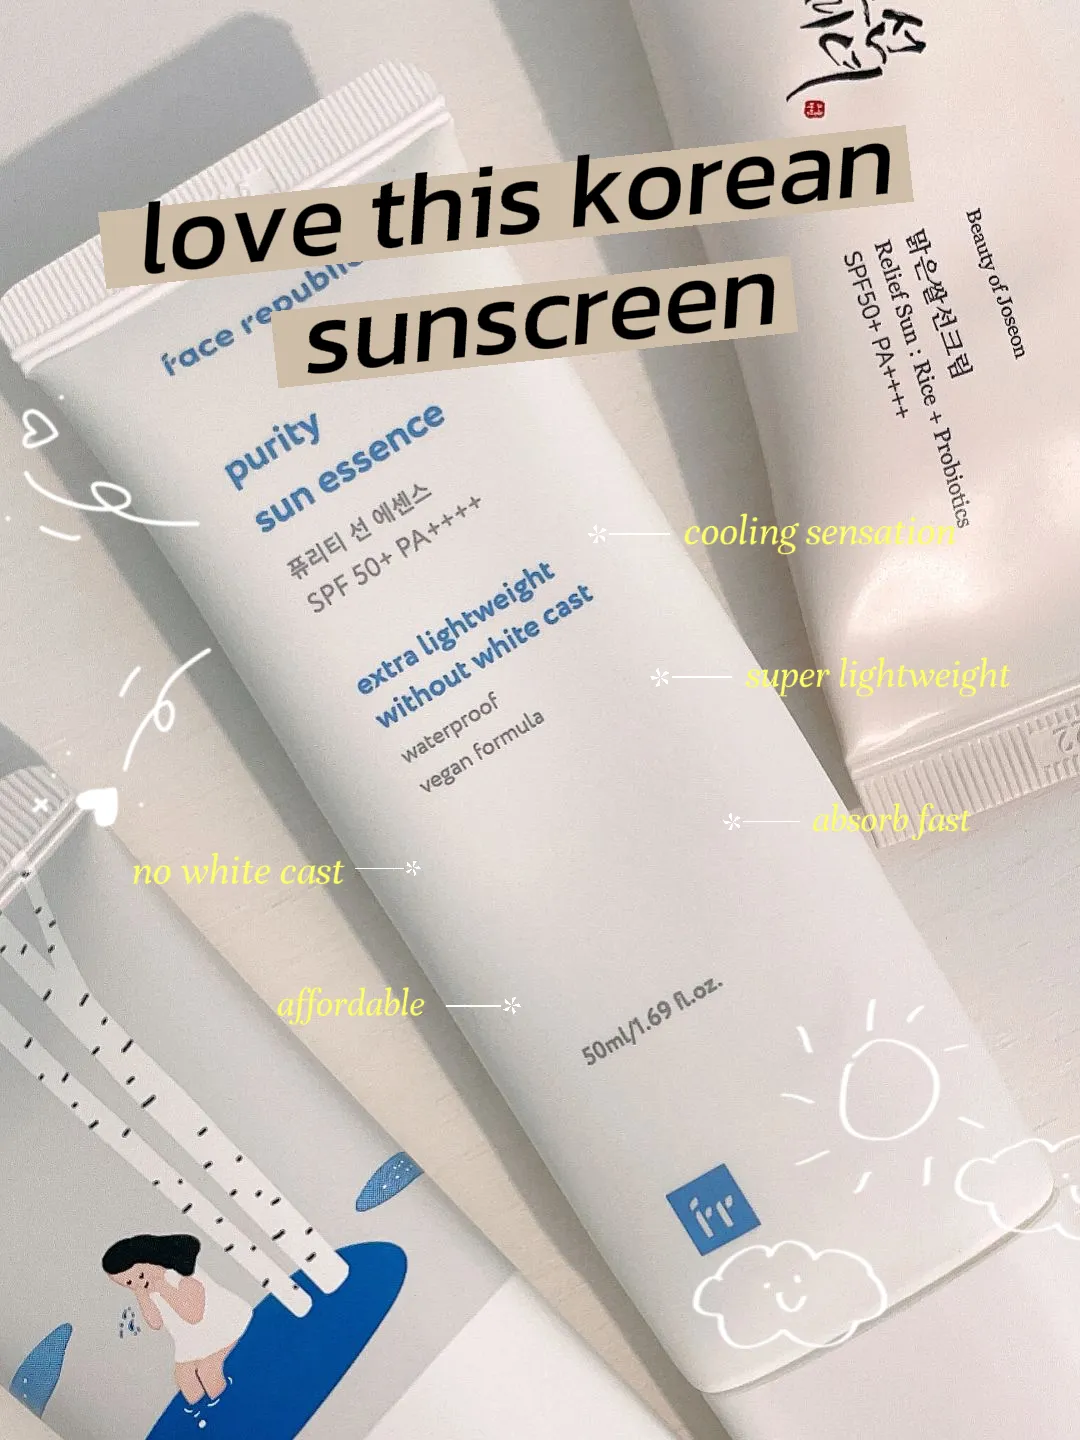 Not gonna gatekeep this korean sunscreen anymore 👀's images